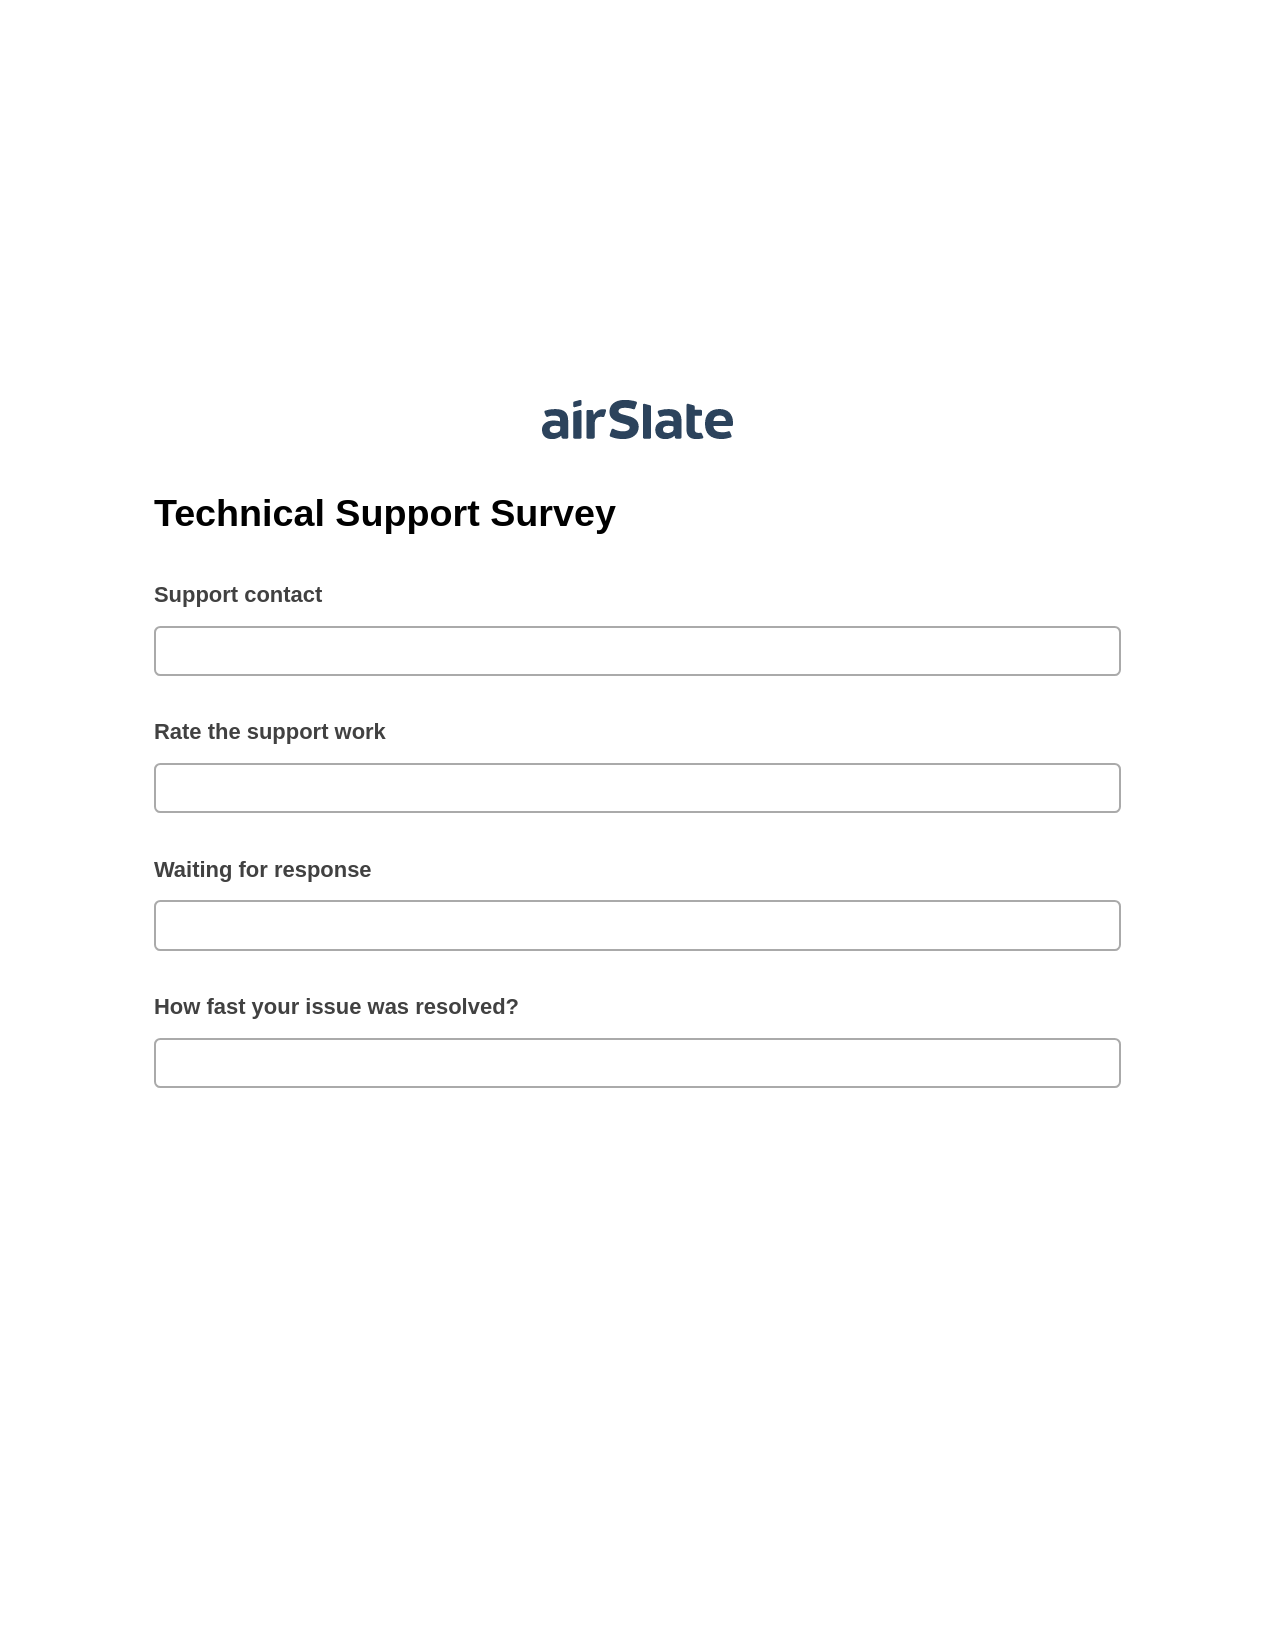 Technical Support Survey Pre-fill from CSV File Bot, Create slate from another Flow Bot, Post-finish Document Bot